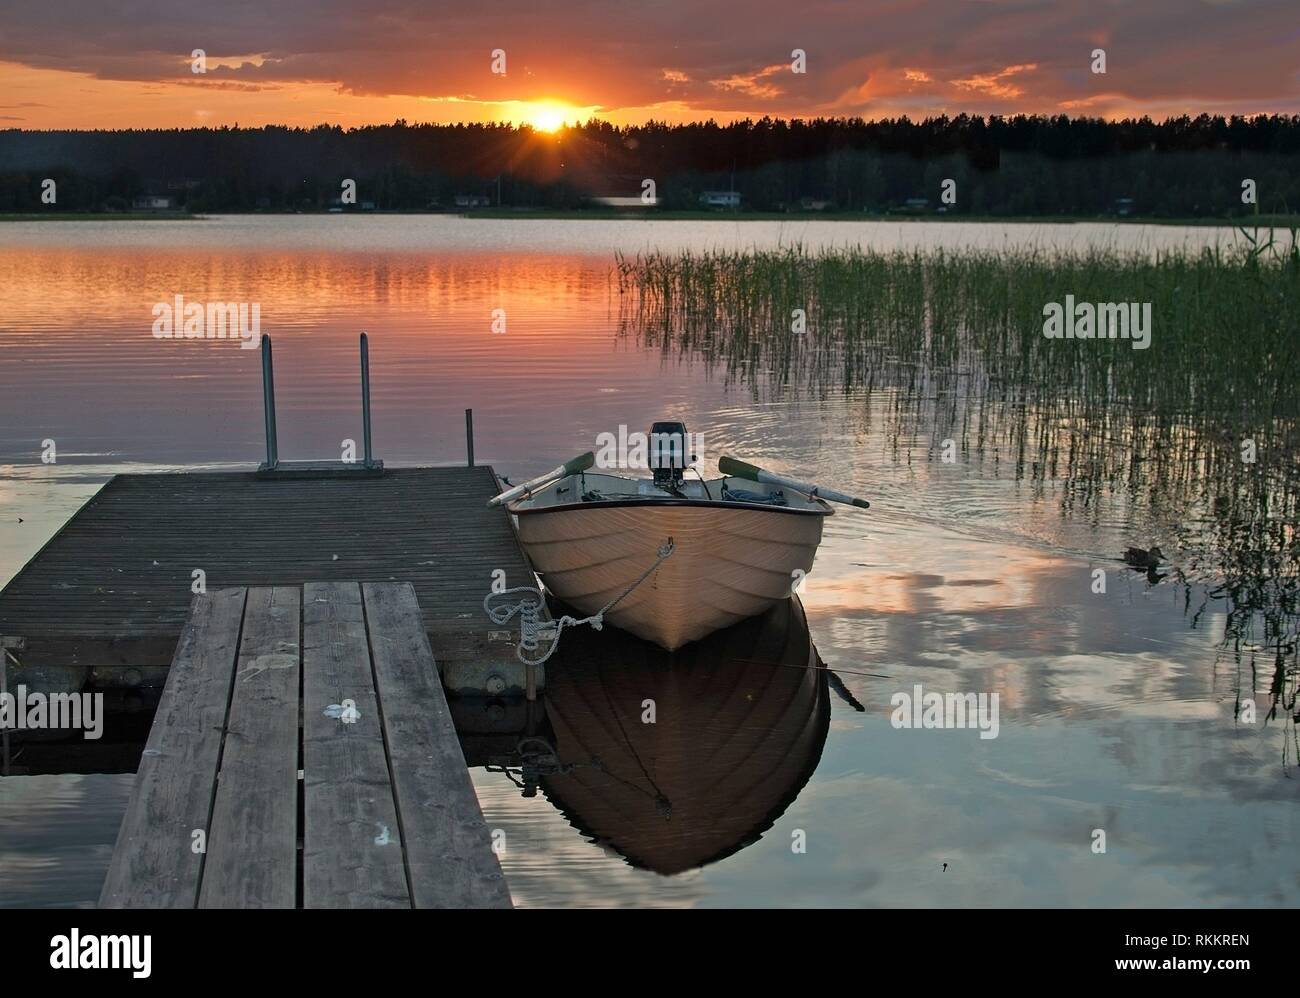 Small boat moored by wooden jetty at peaceful colorful sunset by a lake with sky reflections in tranquil water in Varmland, Sweden. Stock Photo